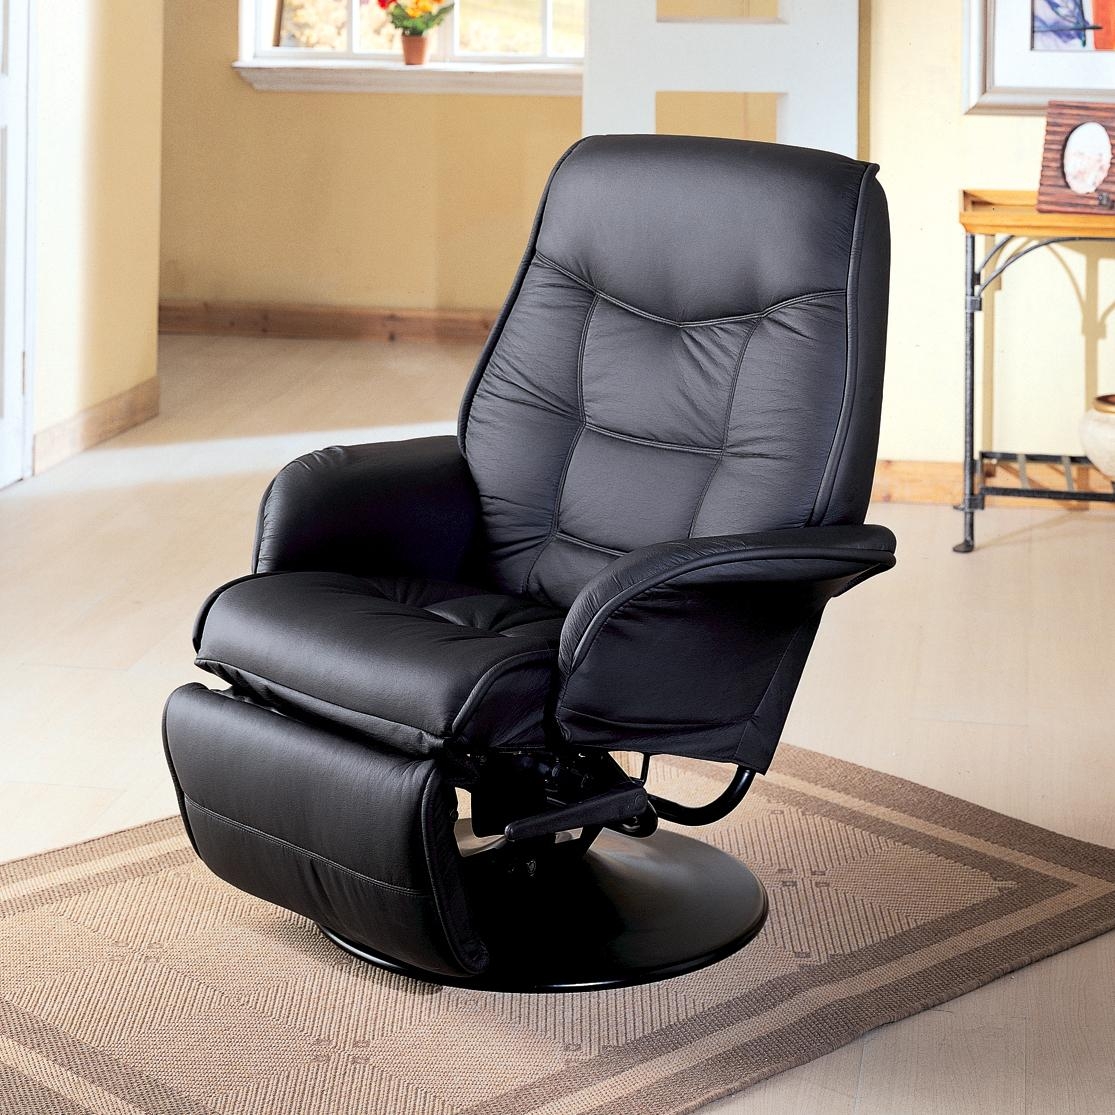 Most Comfortable Recliners Visualhunt, Black Leather Rocking Recliner Chair